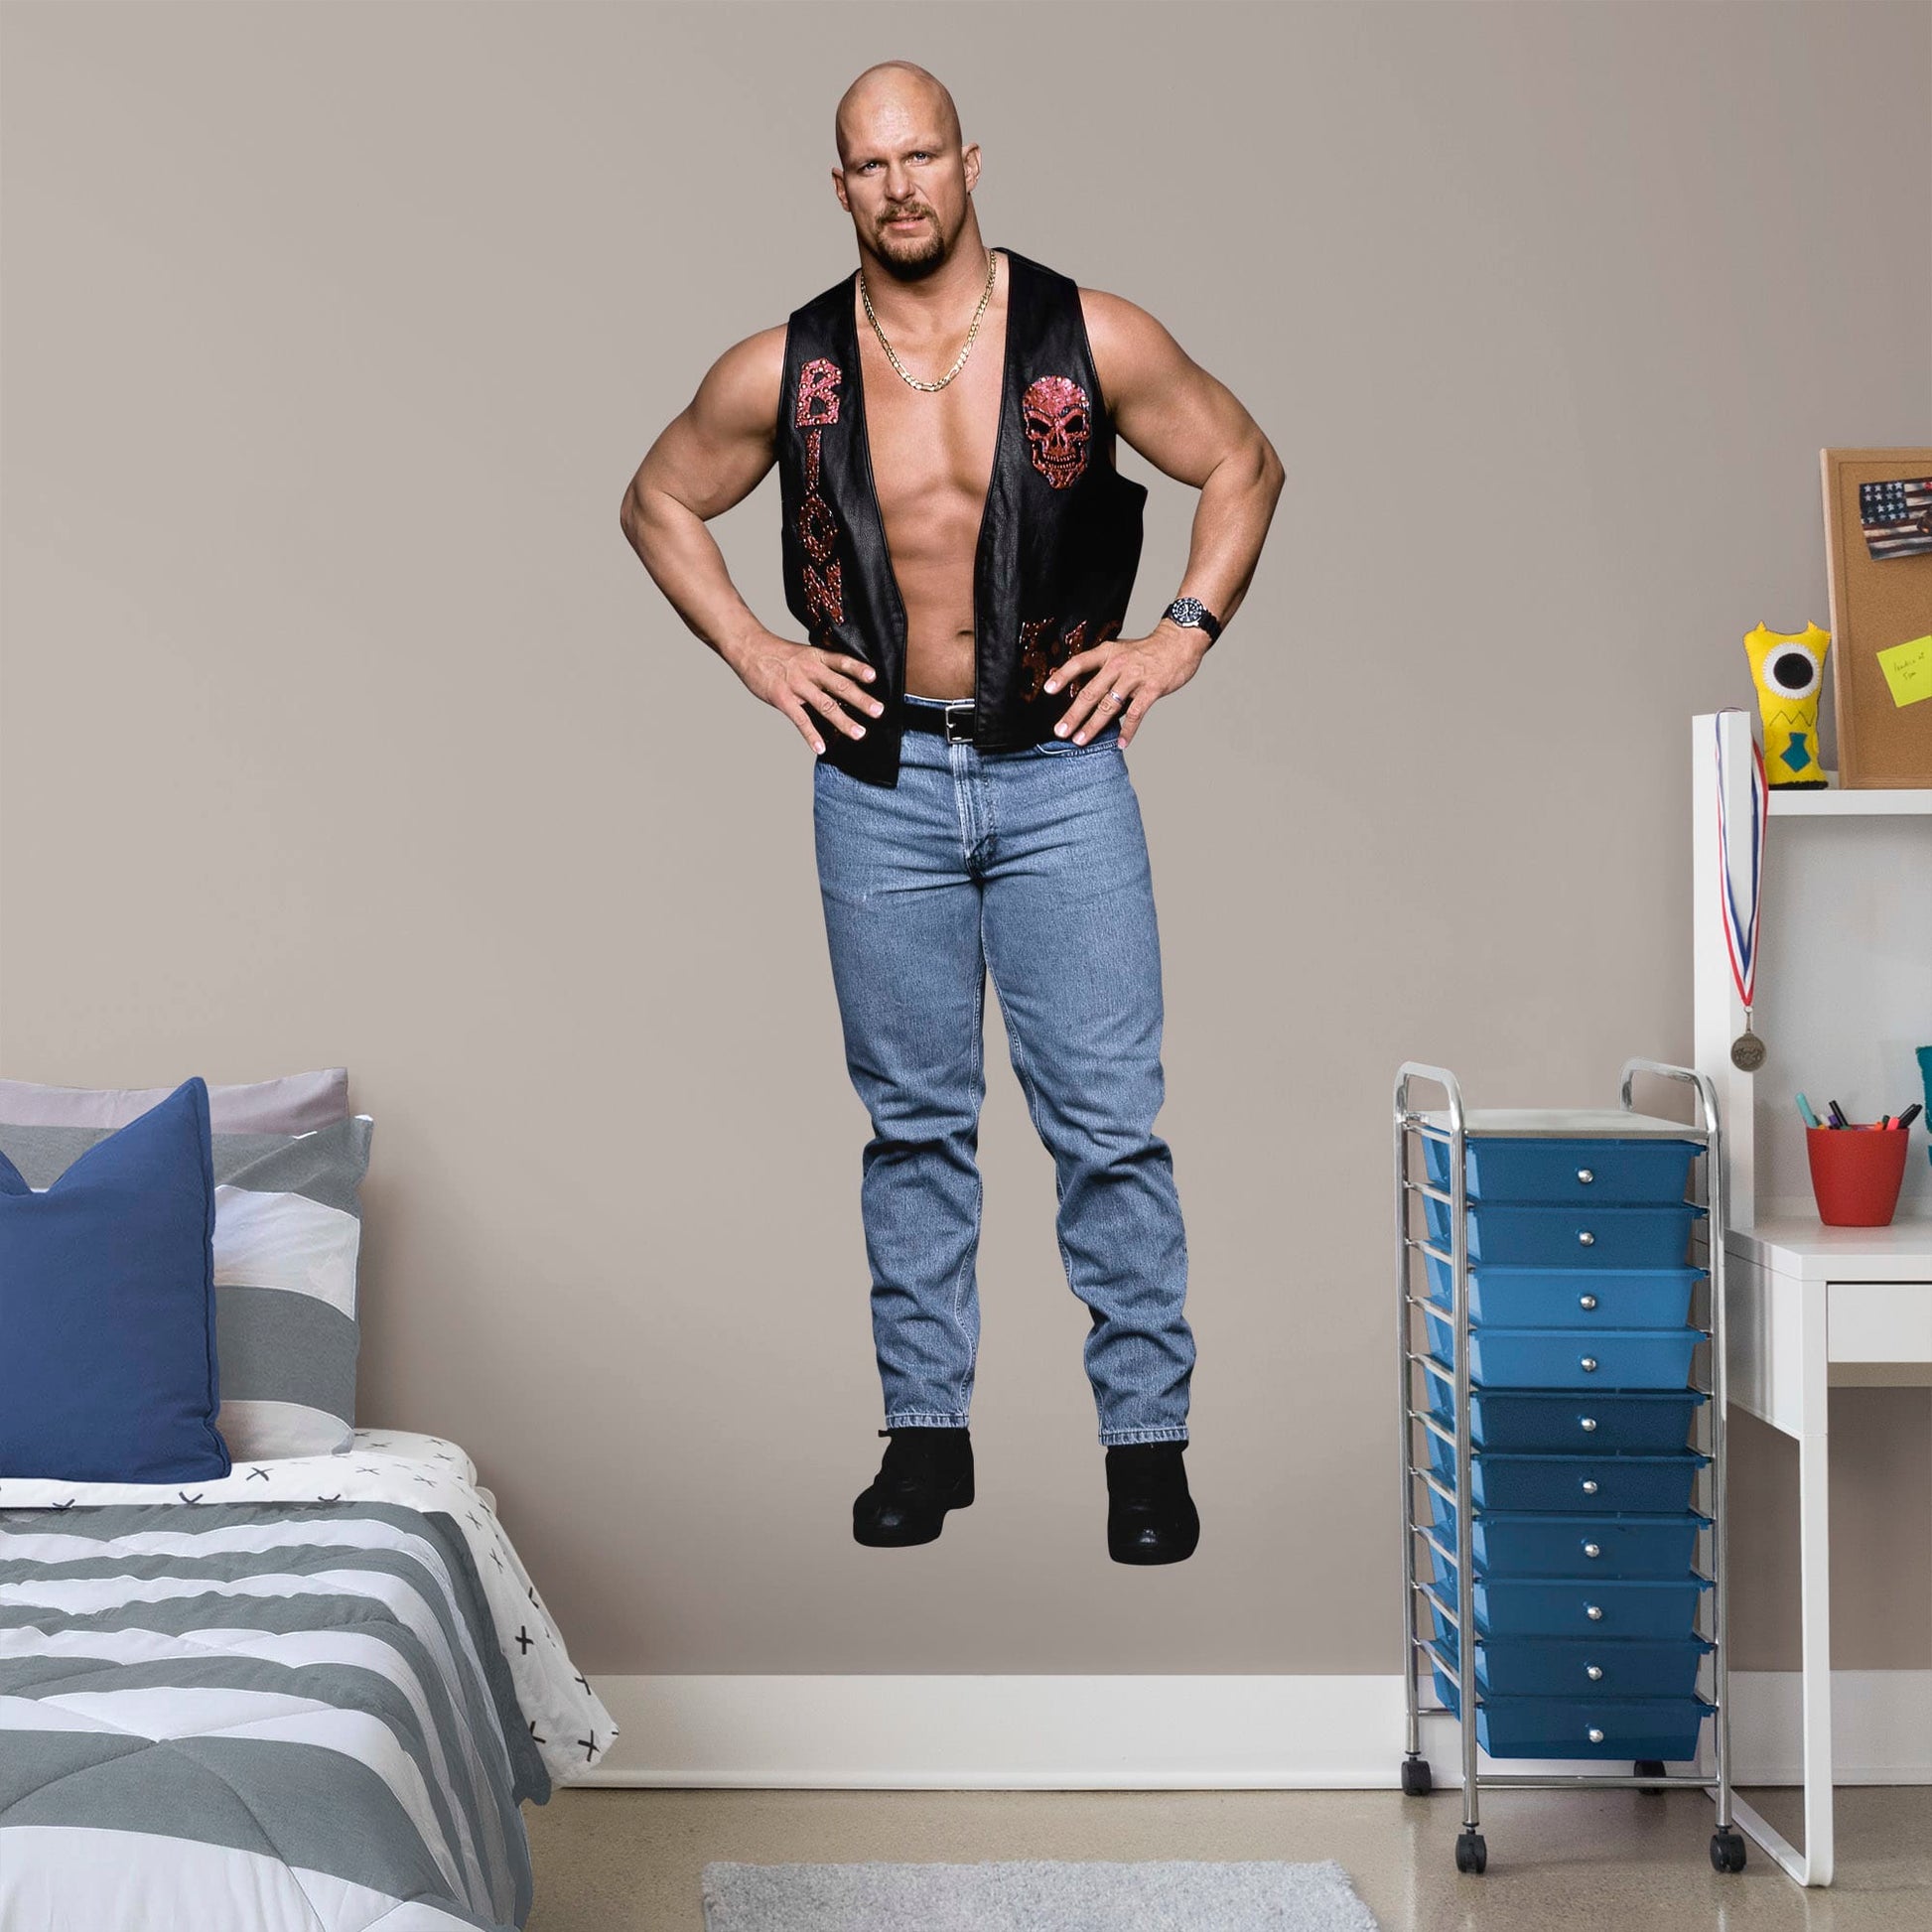 Stone Cold Steve Austin 2021 Mural - Officially Licensed WWE Removable –  Fathead